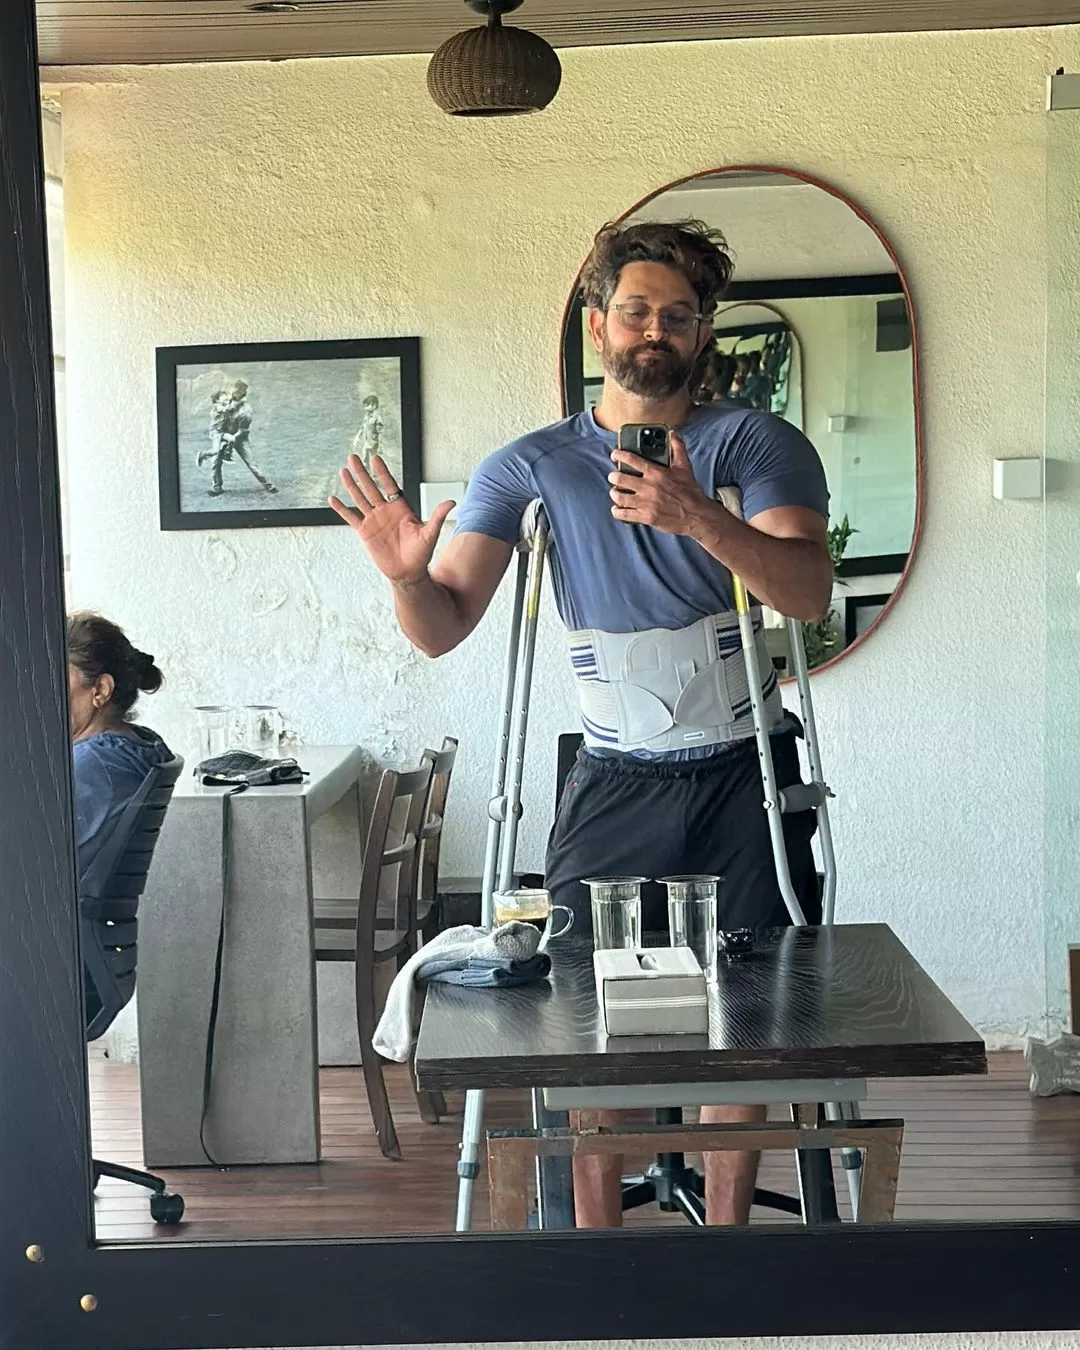 Hrithik Roshan's Crutch Vibes After Muscle Injury: GF Saba Azad and Celebs Shower Love And Healing Energy!